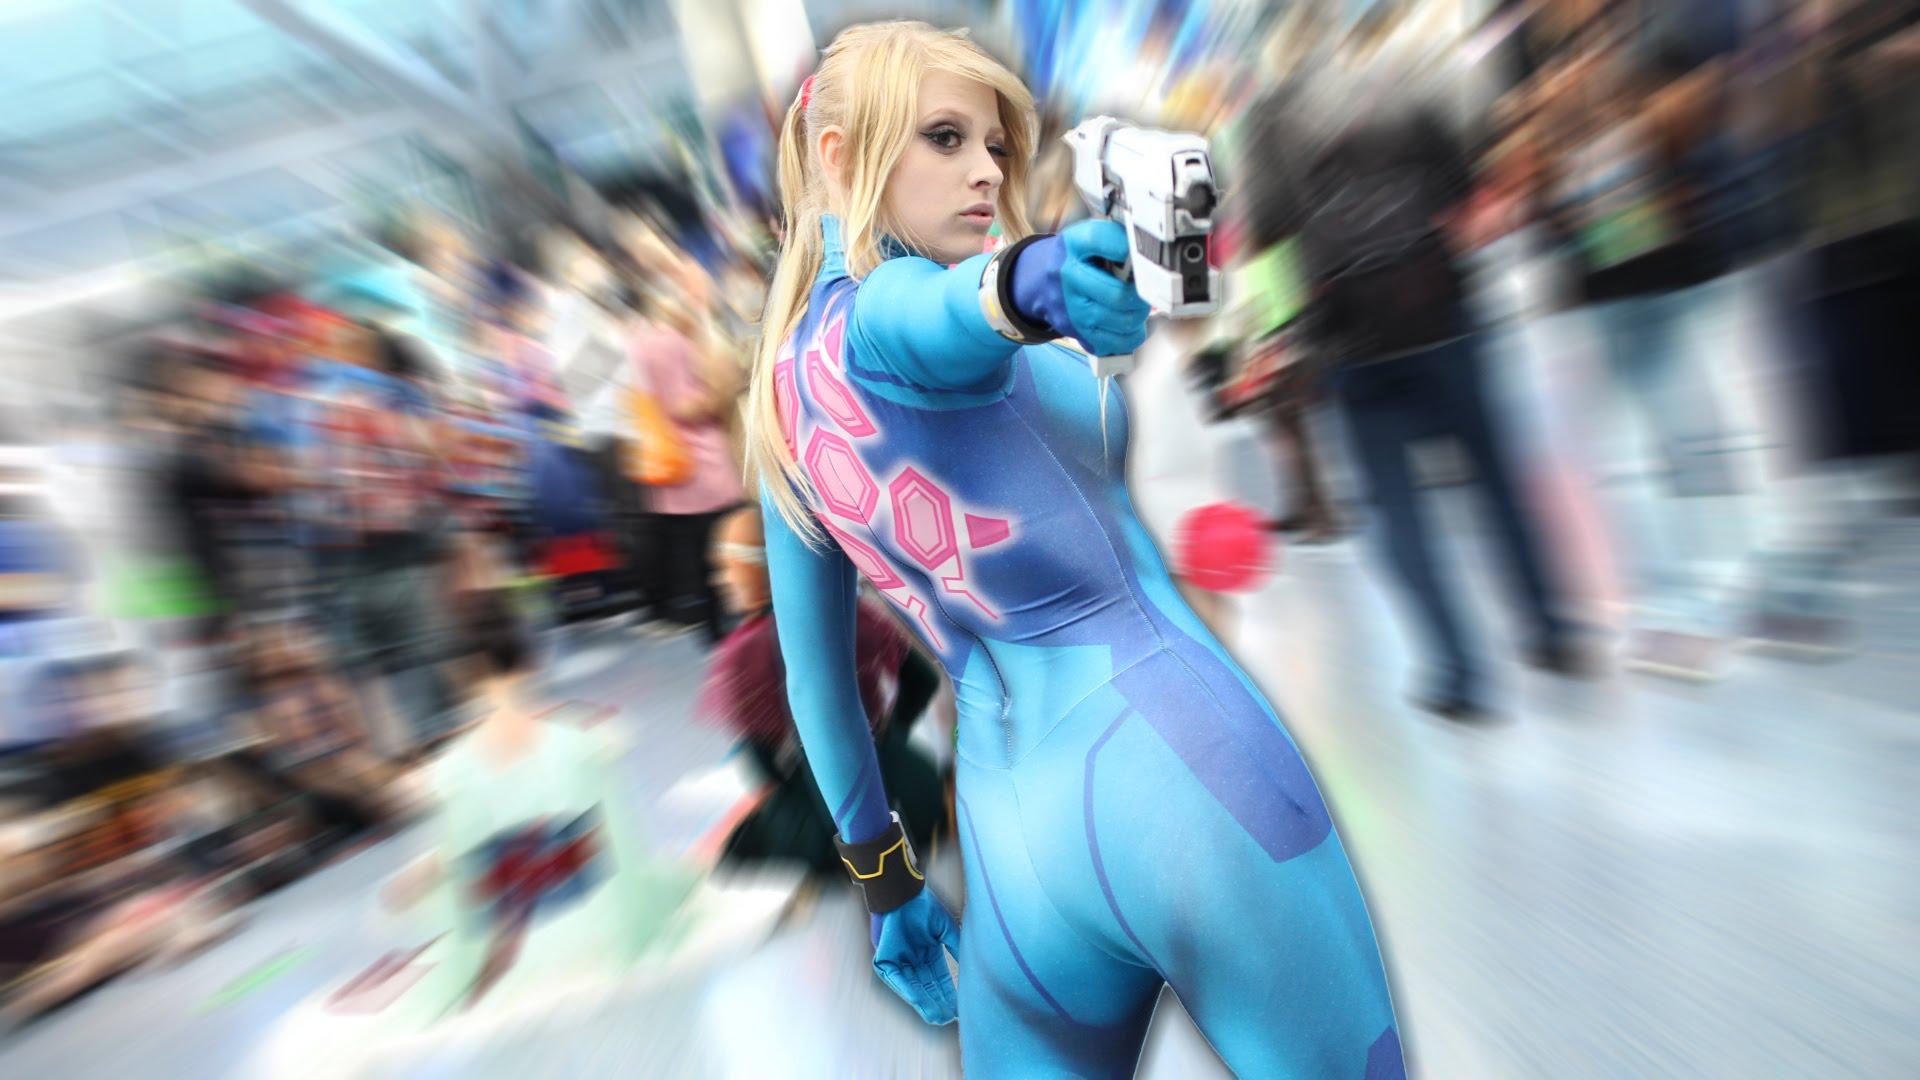 The Most AMAZING Anime Expo Cosplay